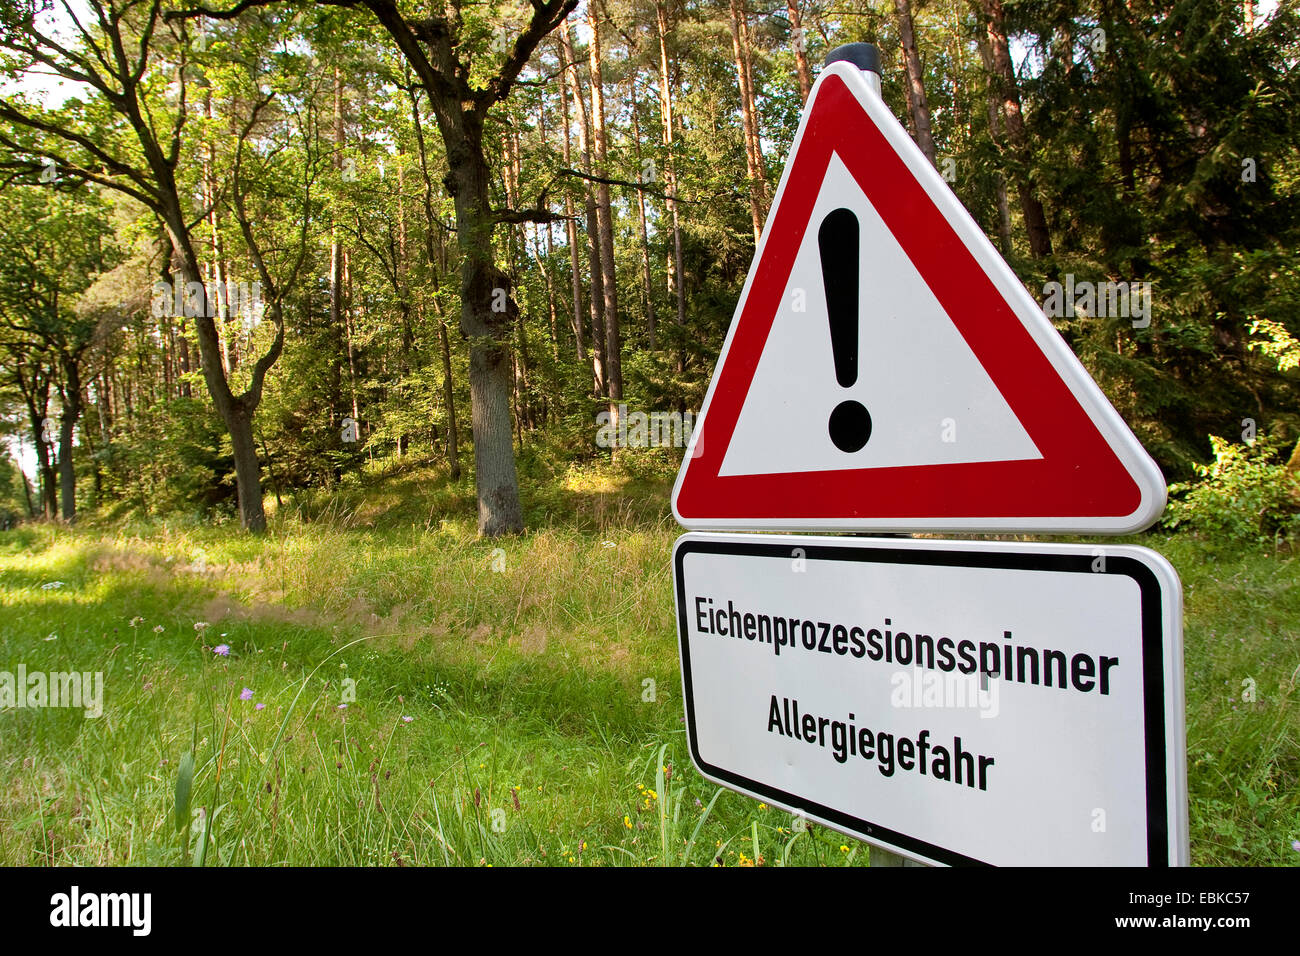 oak processionary moth (Thaumetopoea processionea), sign at a forest edge warning against allergy caused by the moths having infested the forest, Germany Stock Photo